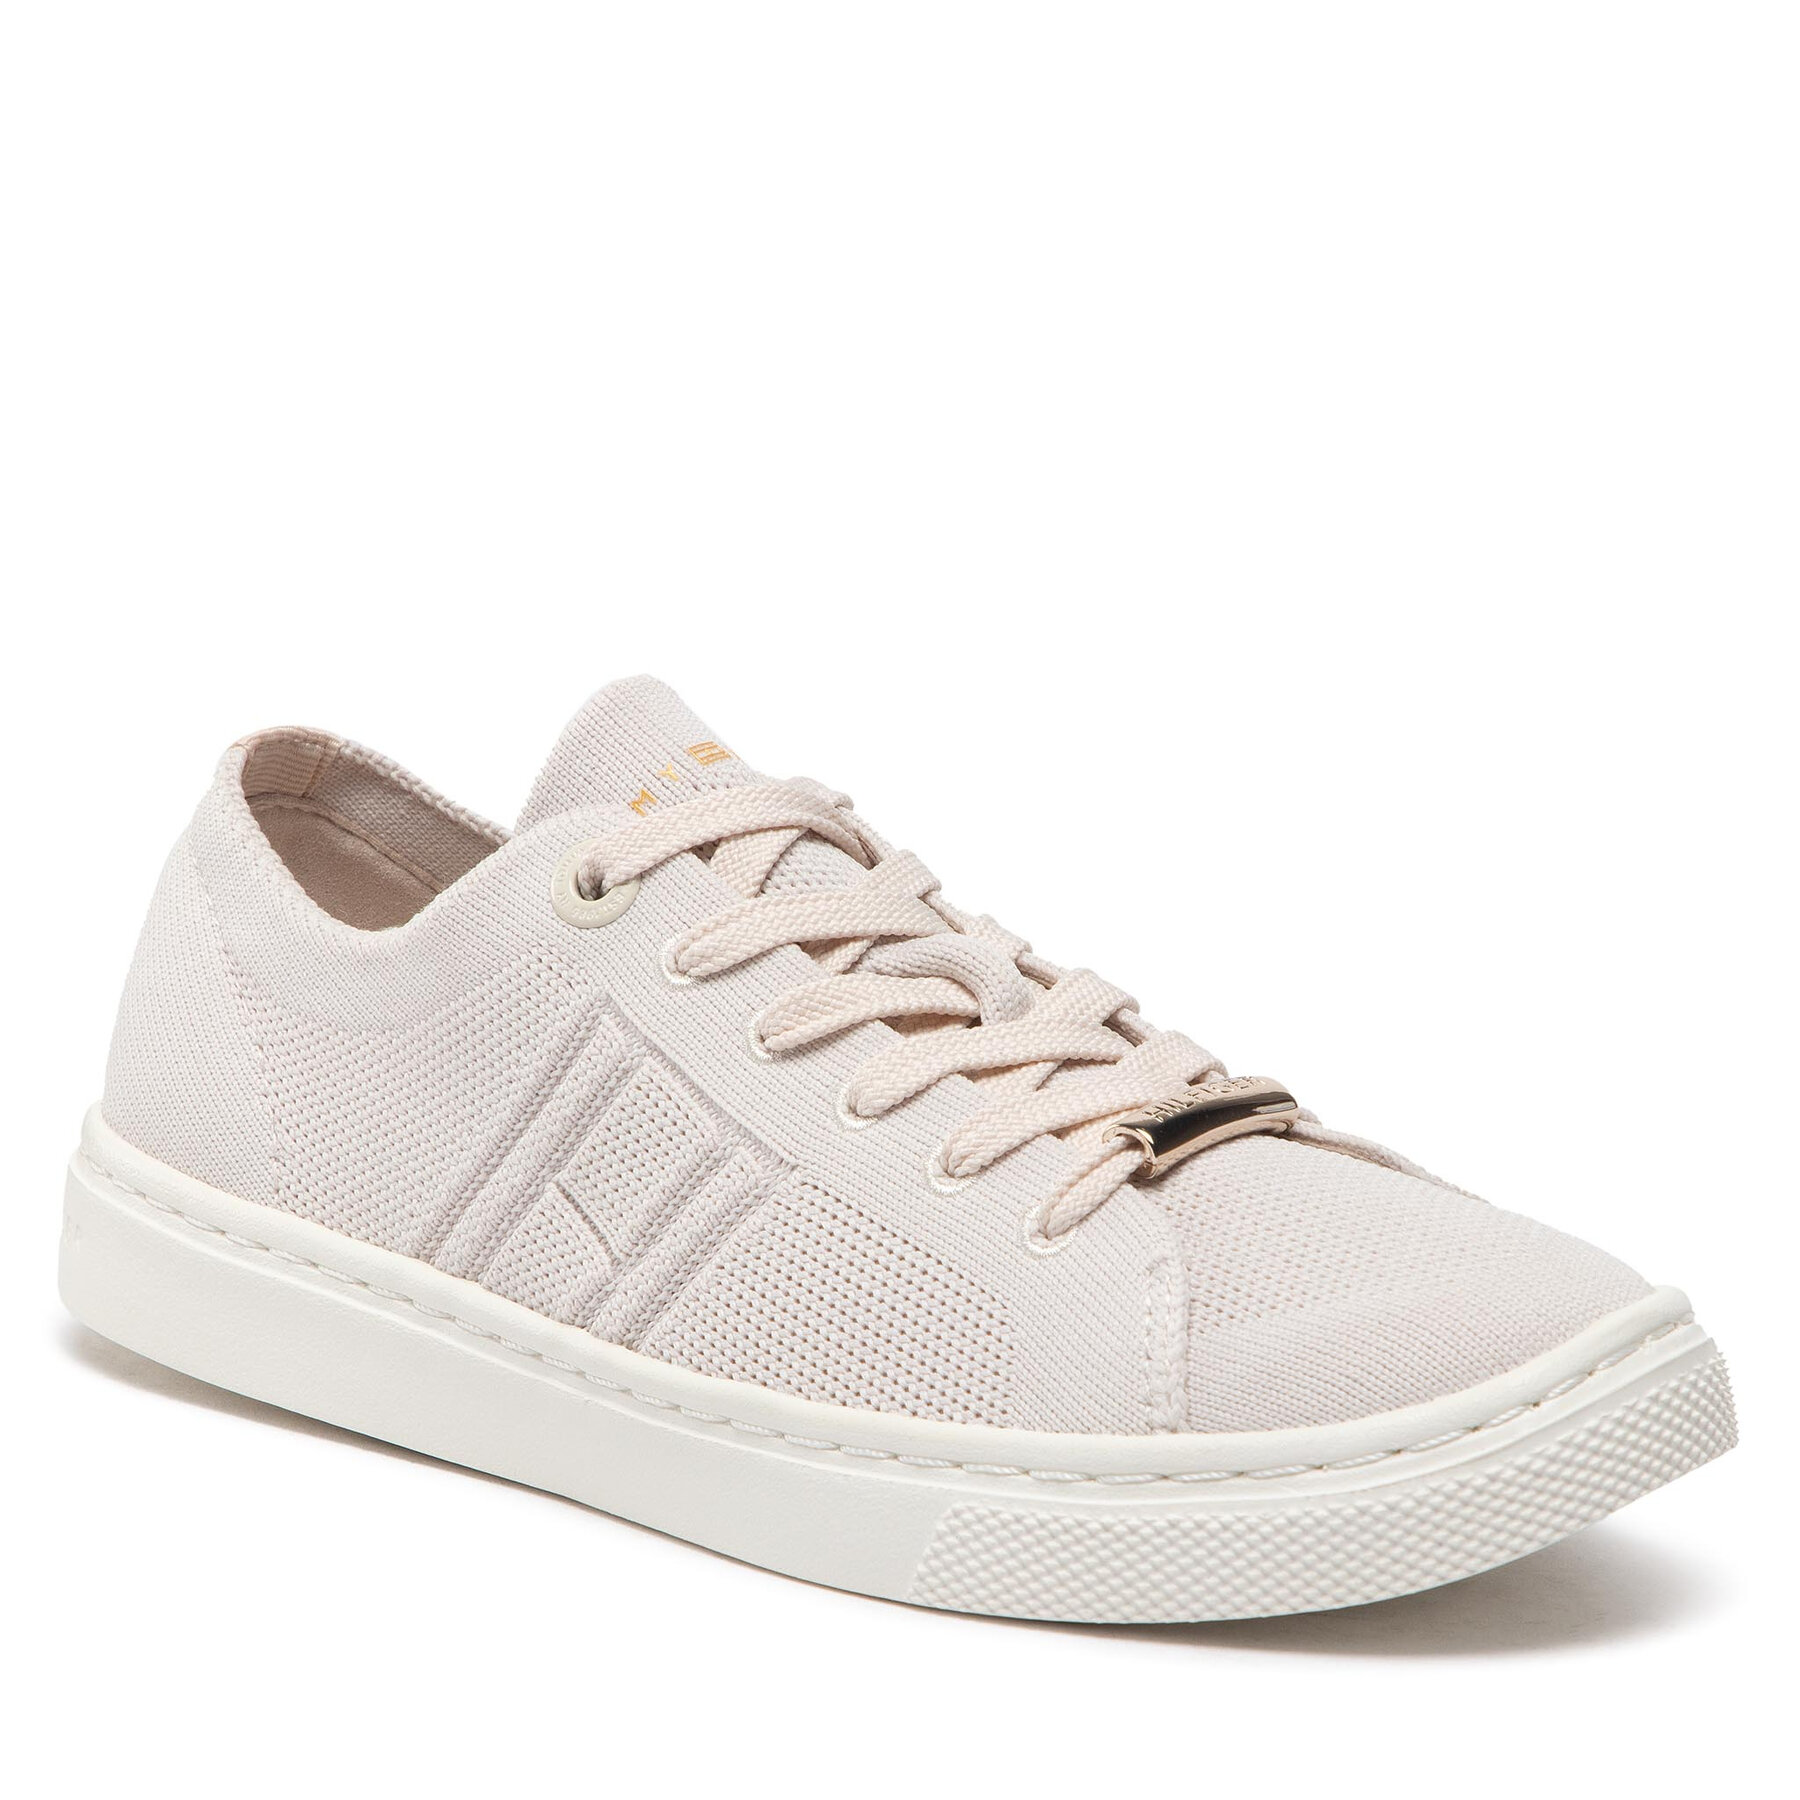 Sneakers Tommy Hilfiger Knitted Light Cupsole FW0FW06332 Feather White AF4 epantofi.ro imagine noua